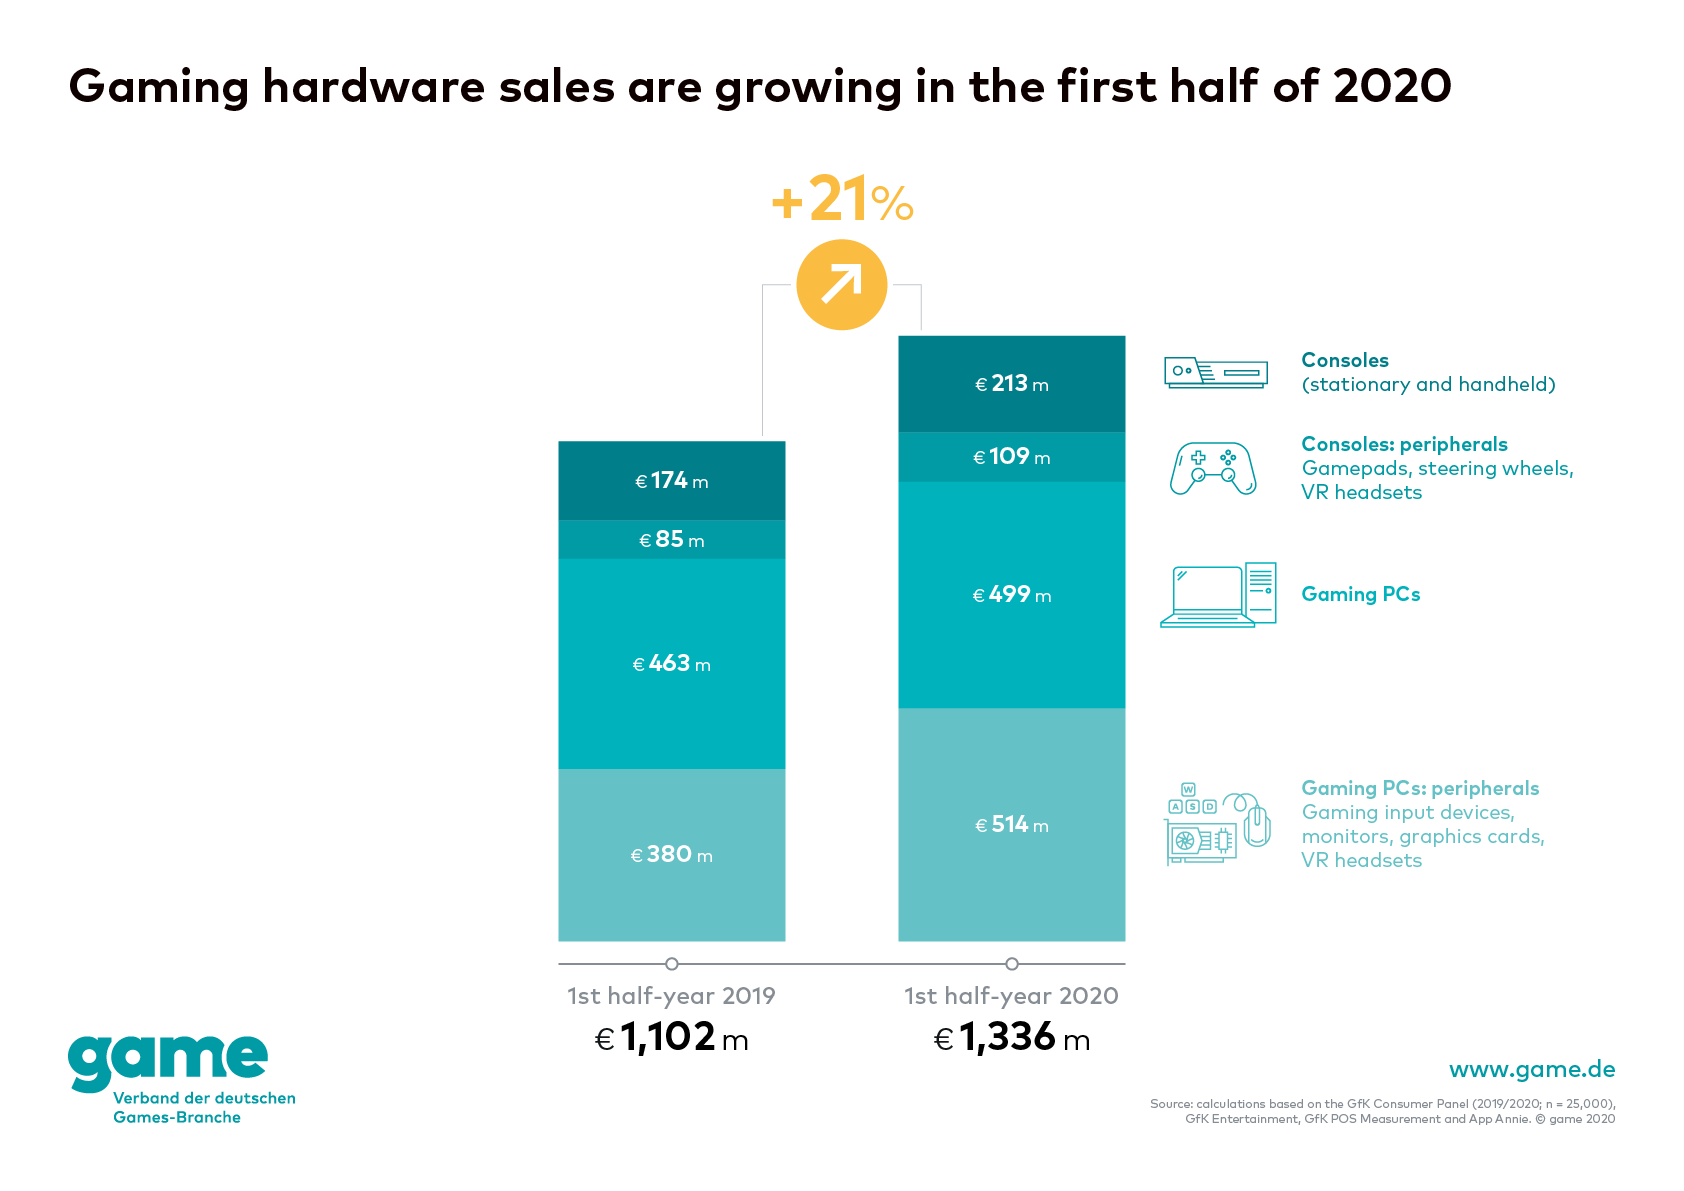 Gaming hardware sales are growing in the first half of 2020